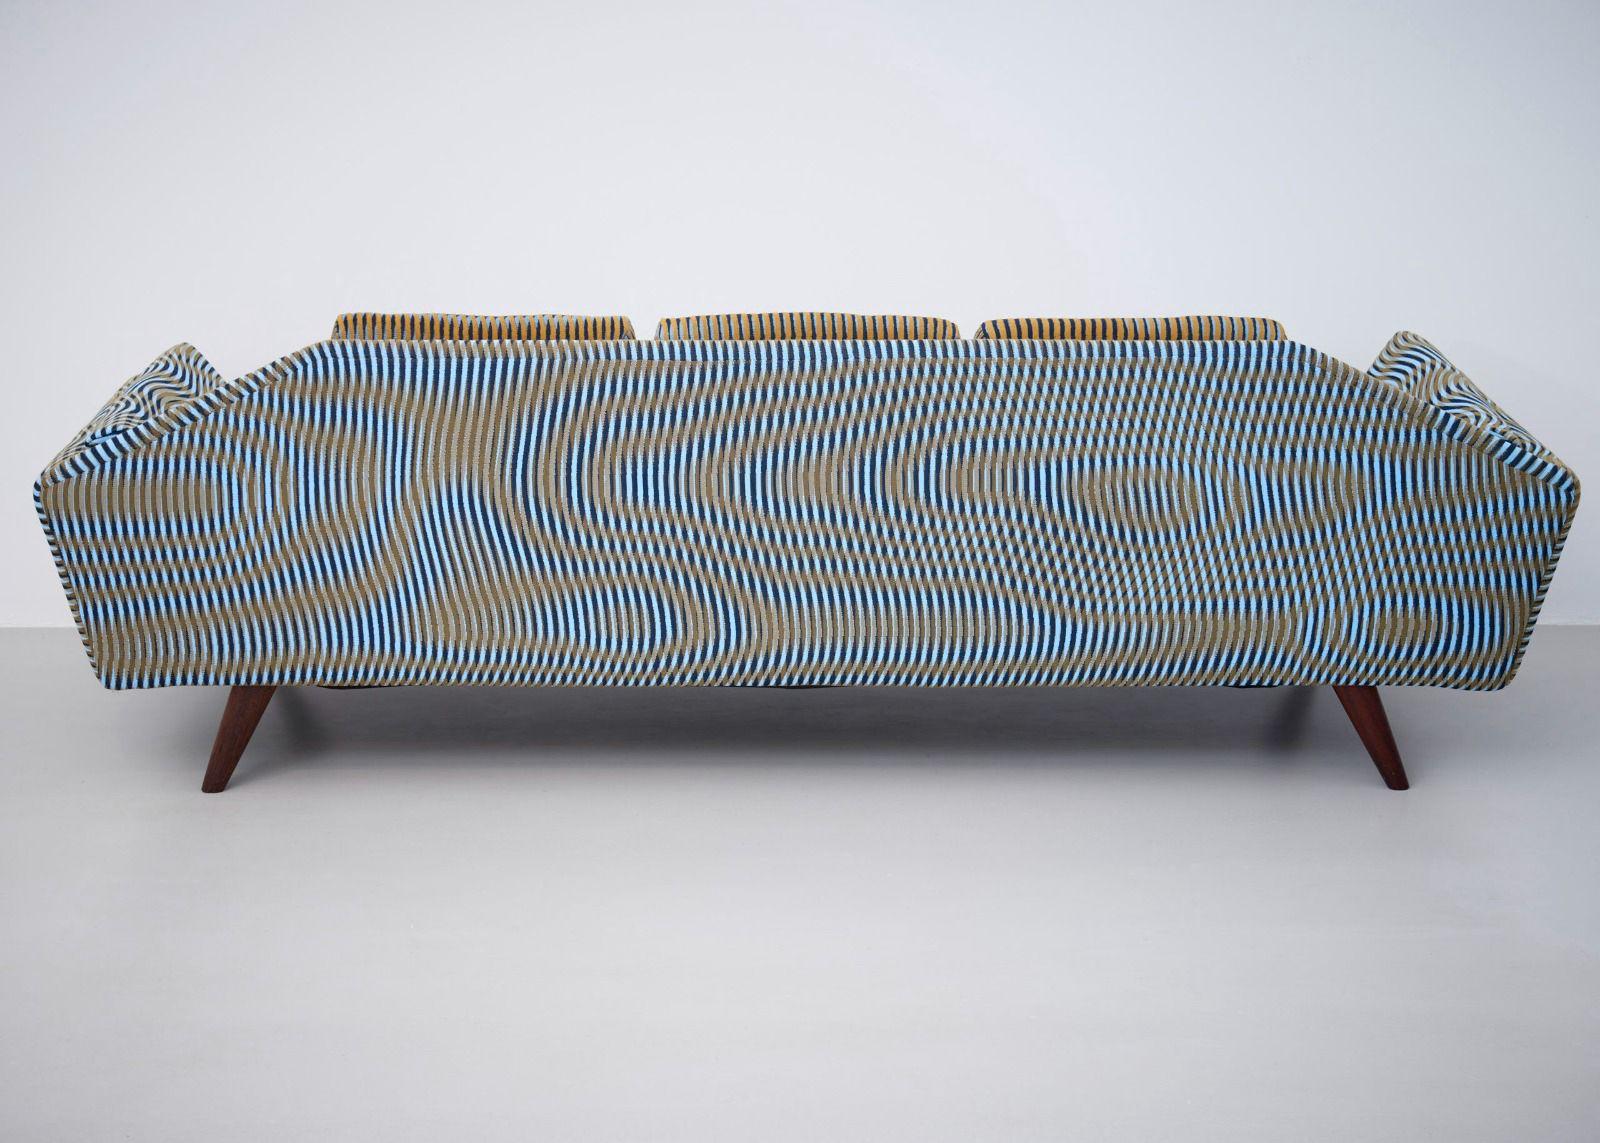 American Newly upholstered Adrian Pearsall Gondola Sofa in custom fabric by Case Studies For Sale